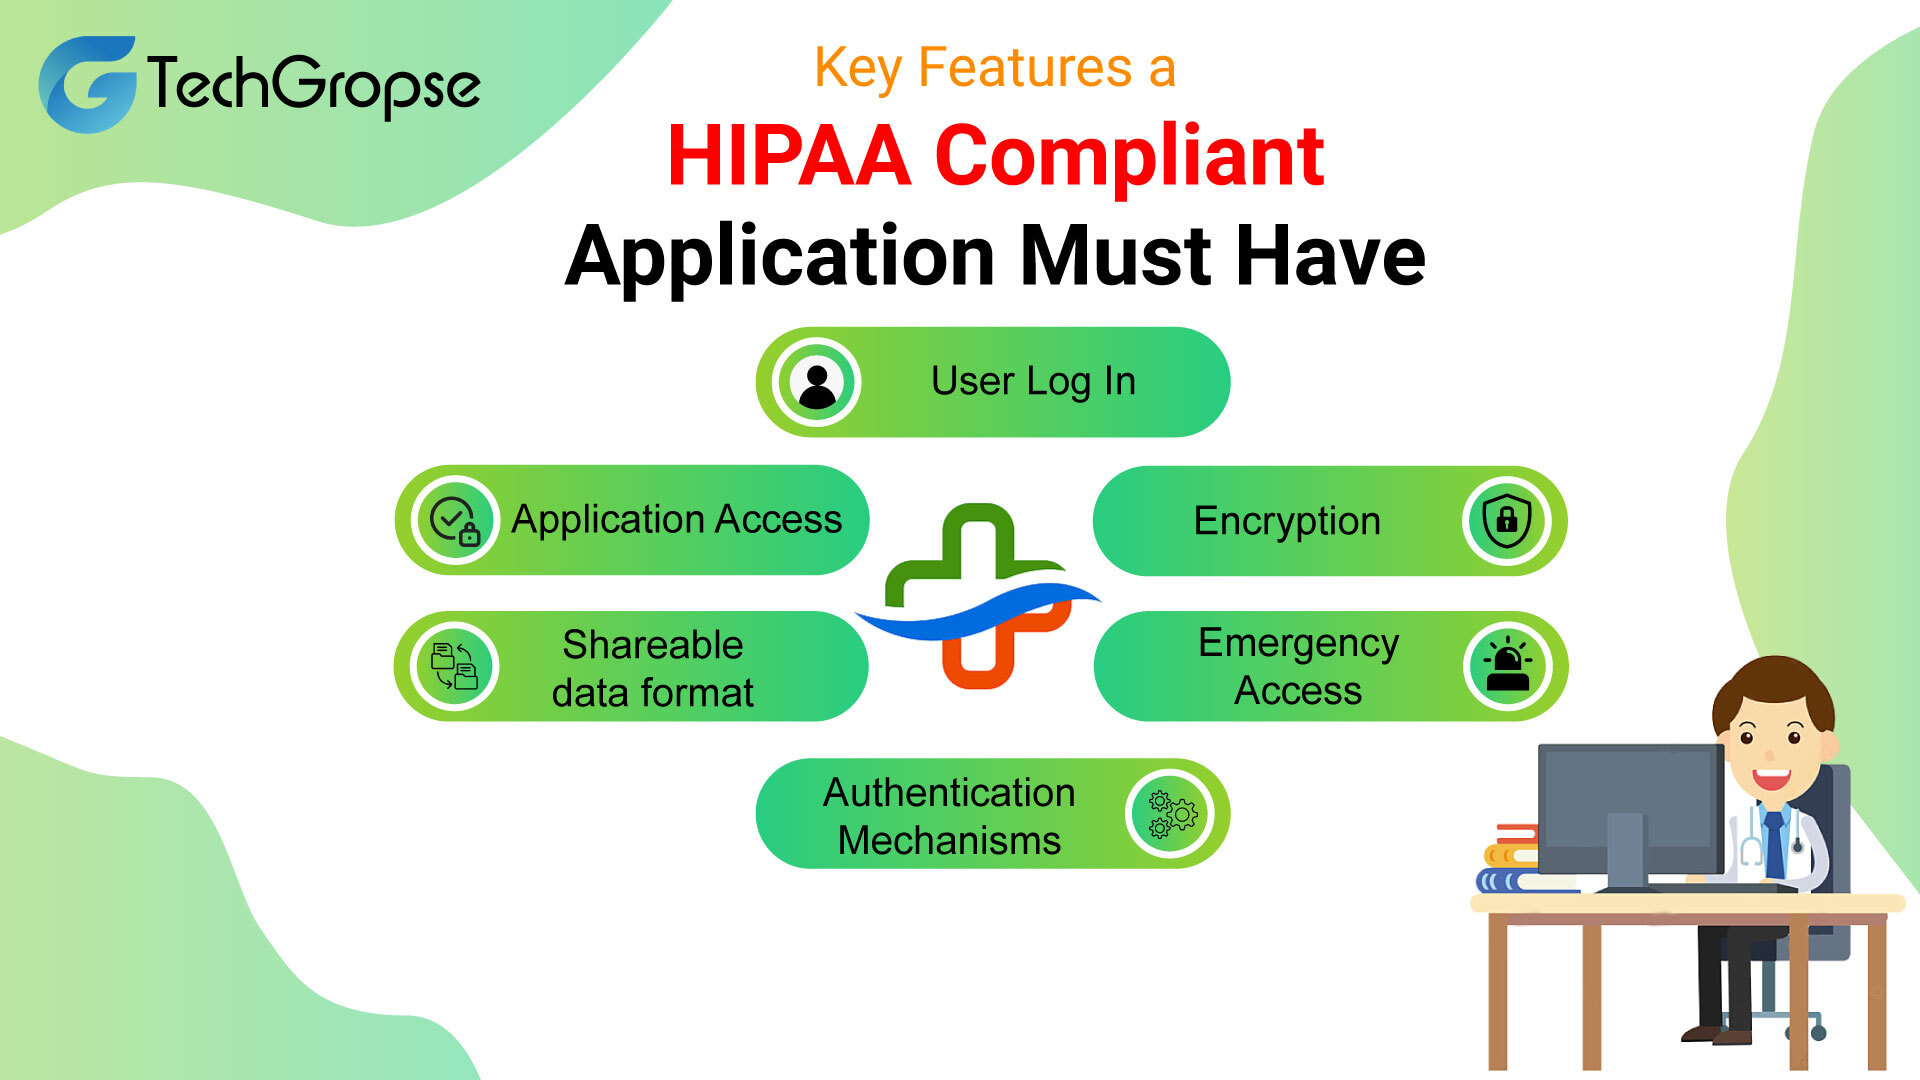 Key Features a HIPAA Compliant Applications Must Have